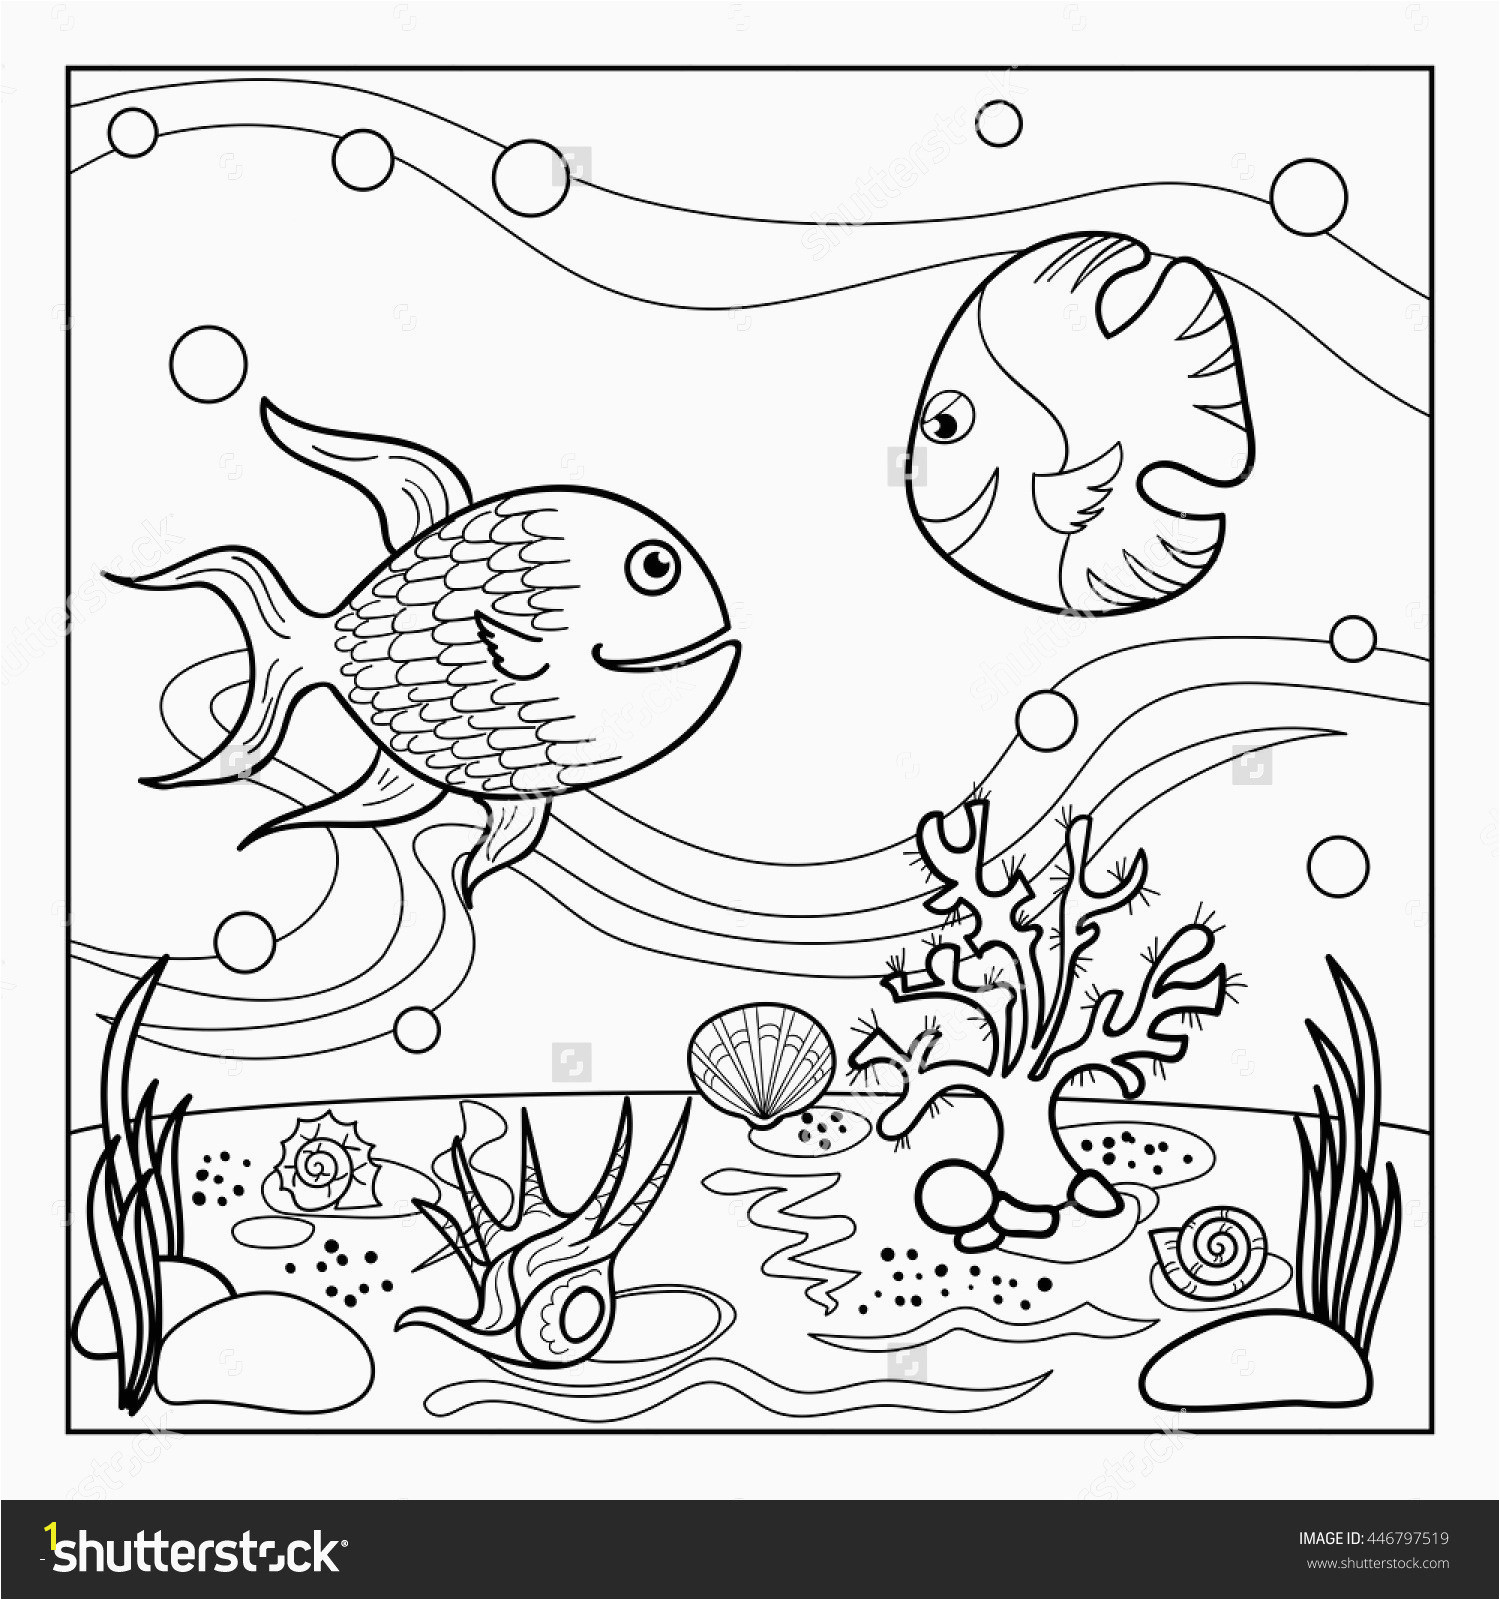 Easy to Draw Feather Feather Coloring Page Fresh Home Coloring Pages Best Color Sheet 0d